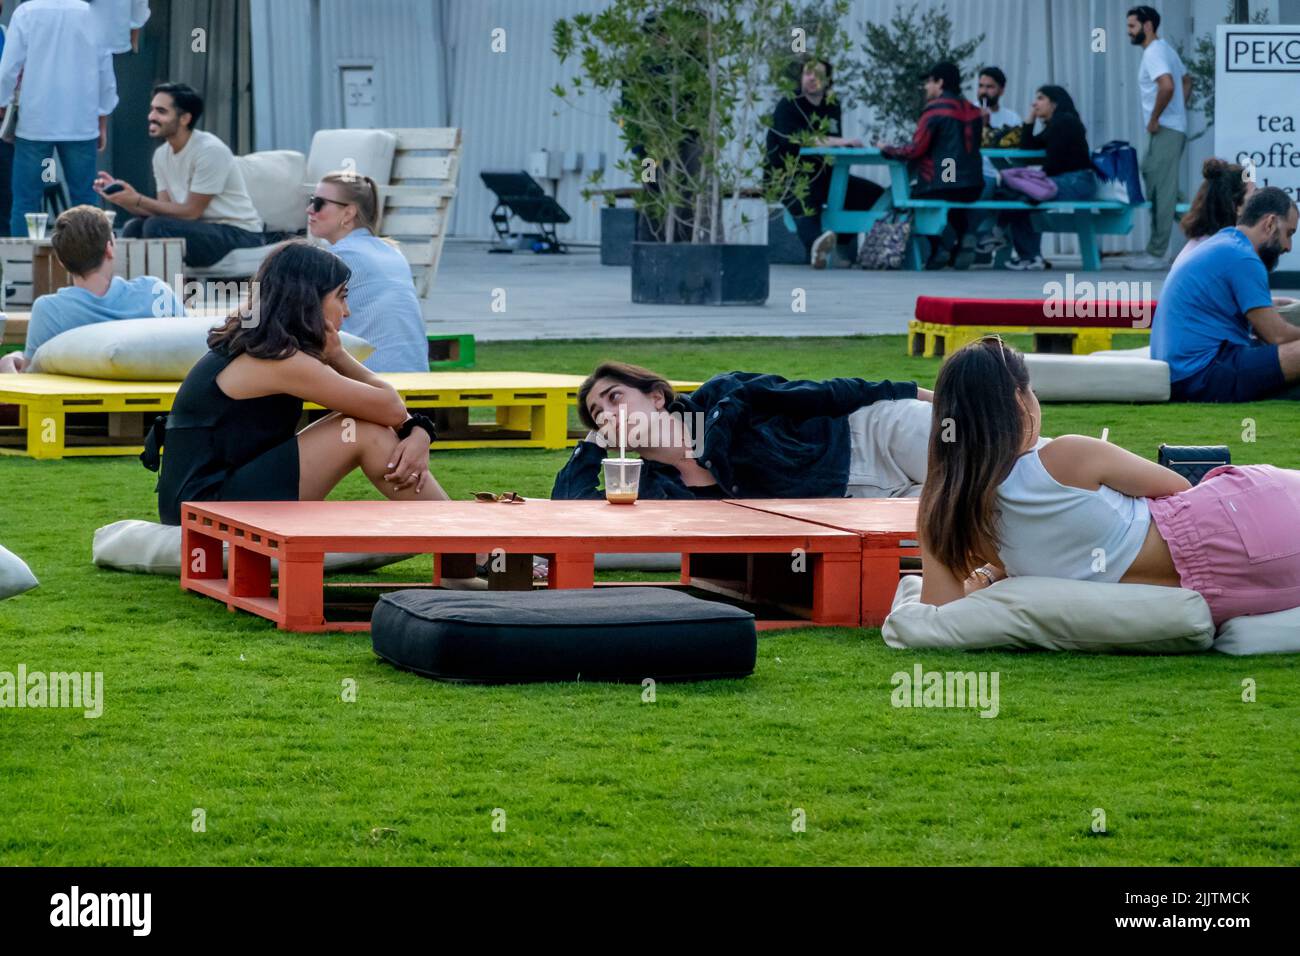 A view of locals and tourists chilling in Alserkal Avenue in Dubai, UAE Stock Photo